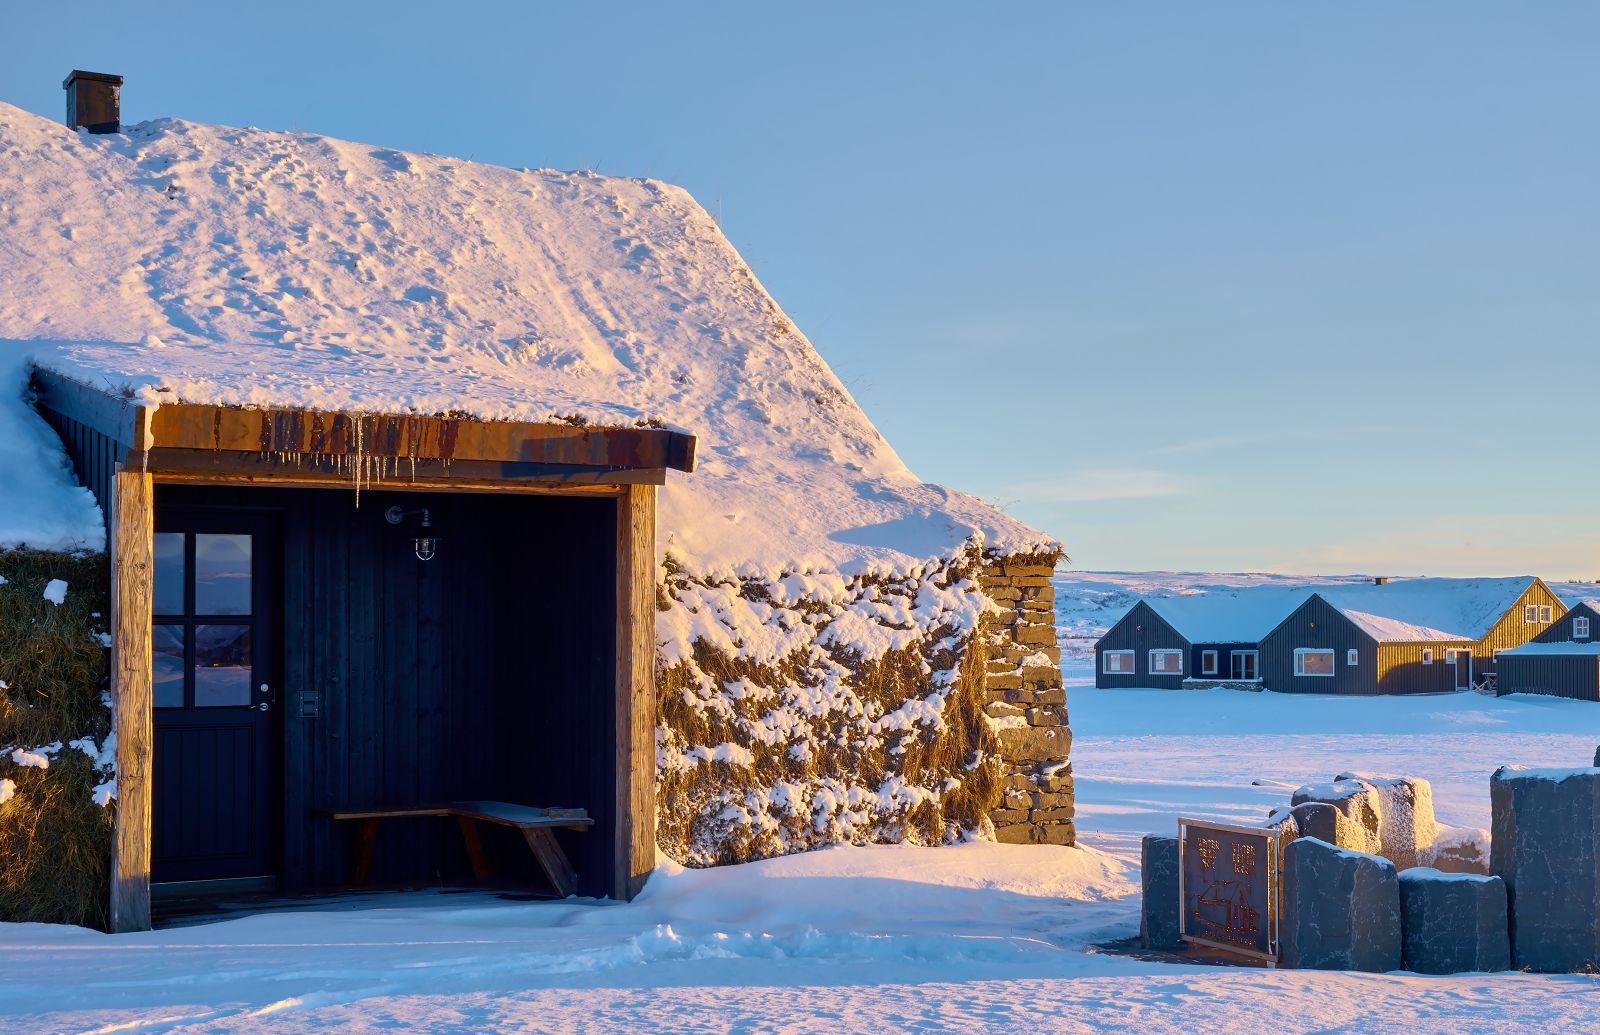 A turhouse with geothermal pool in the snow at Torfhus Retreat hotel in Iceland